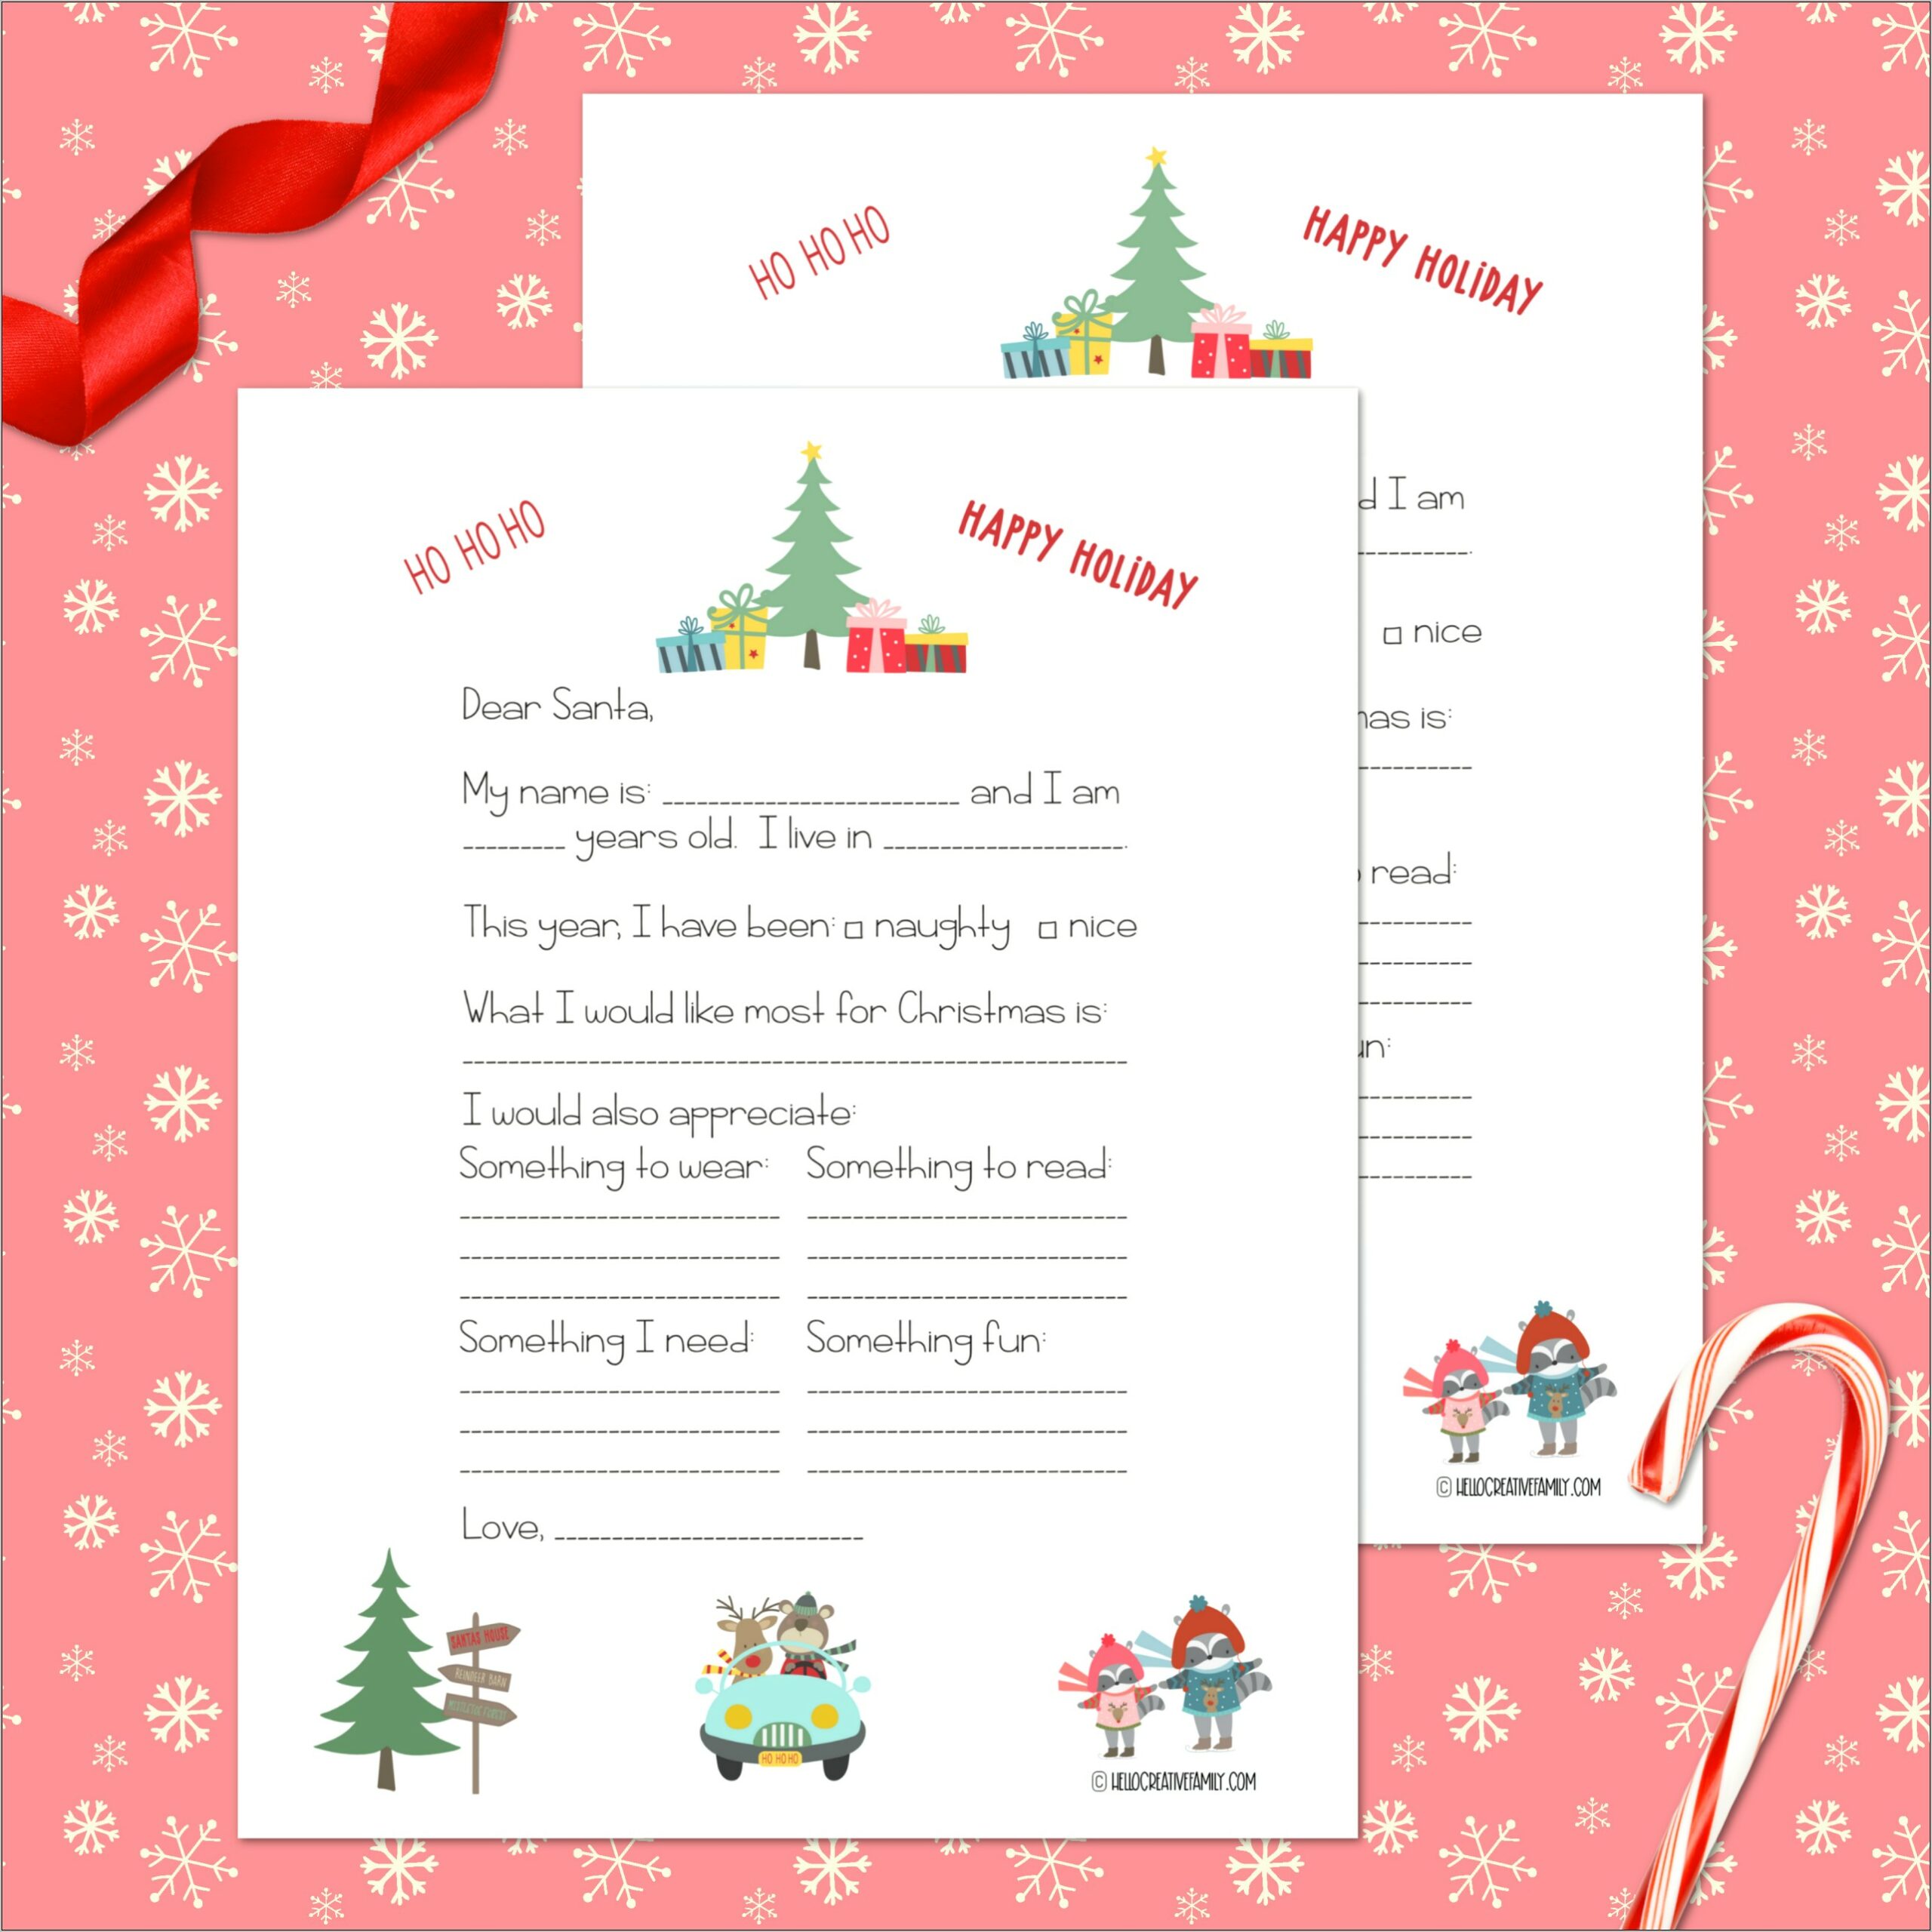 free-letter-to-santa-letter-template-resume-example-gallery